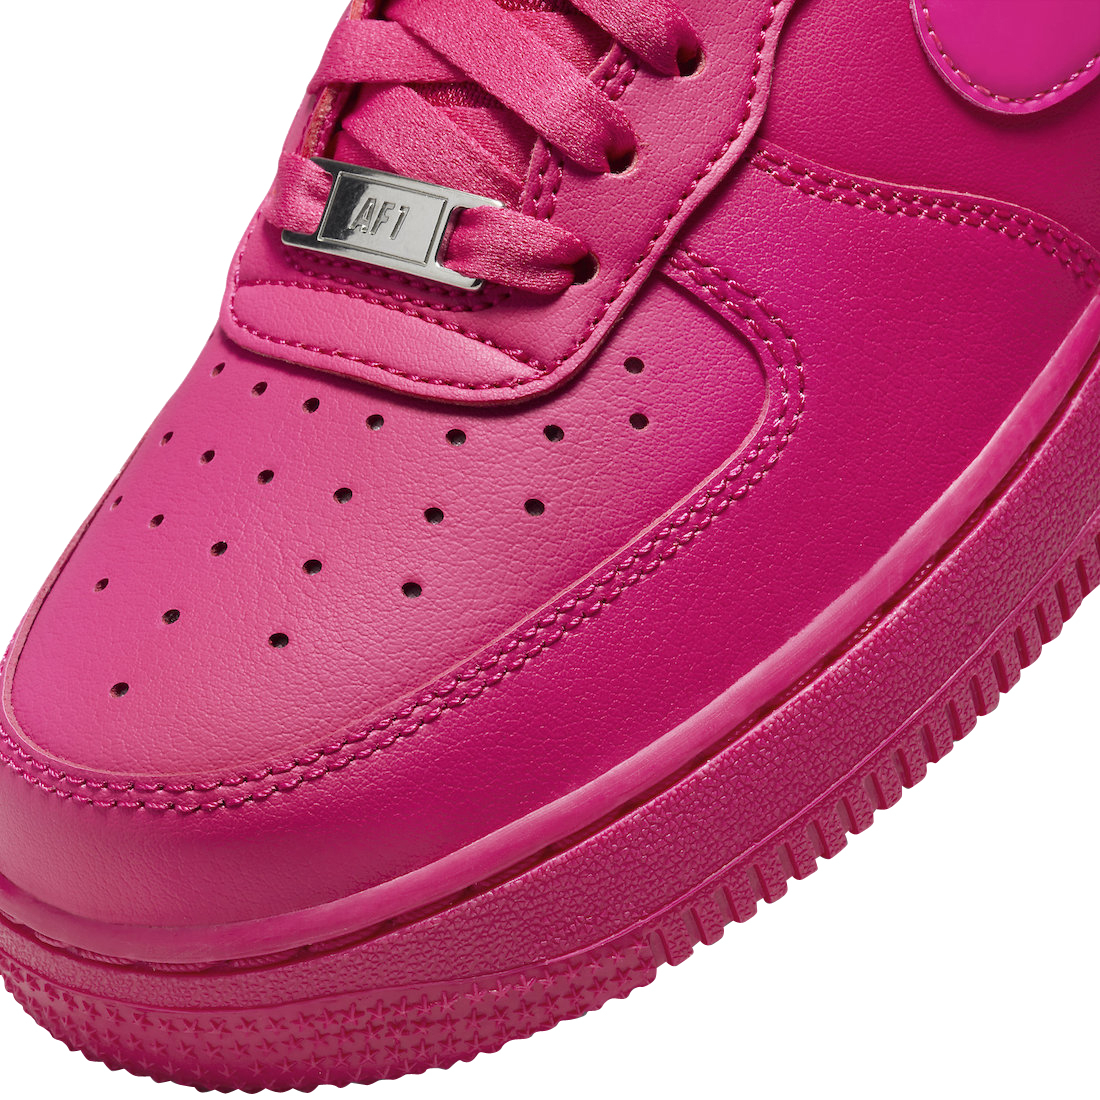 Nike WMNS Air Force 1 Low Fireberry